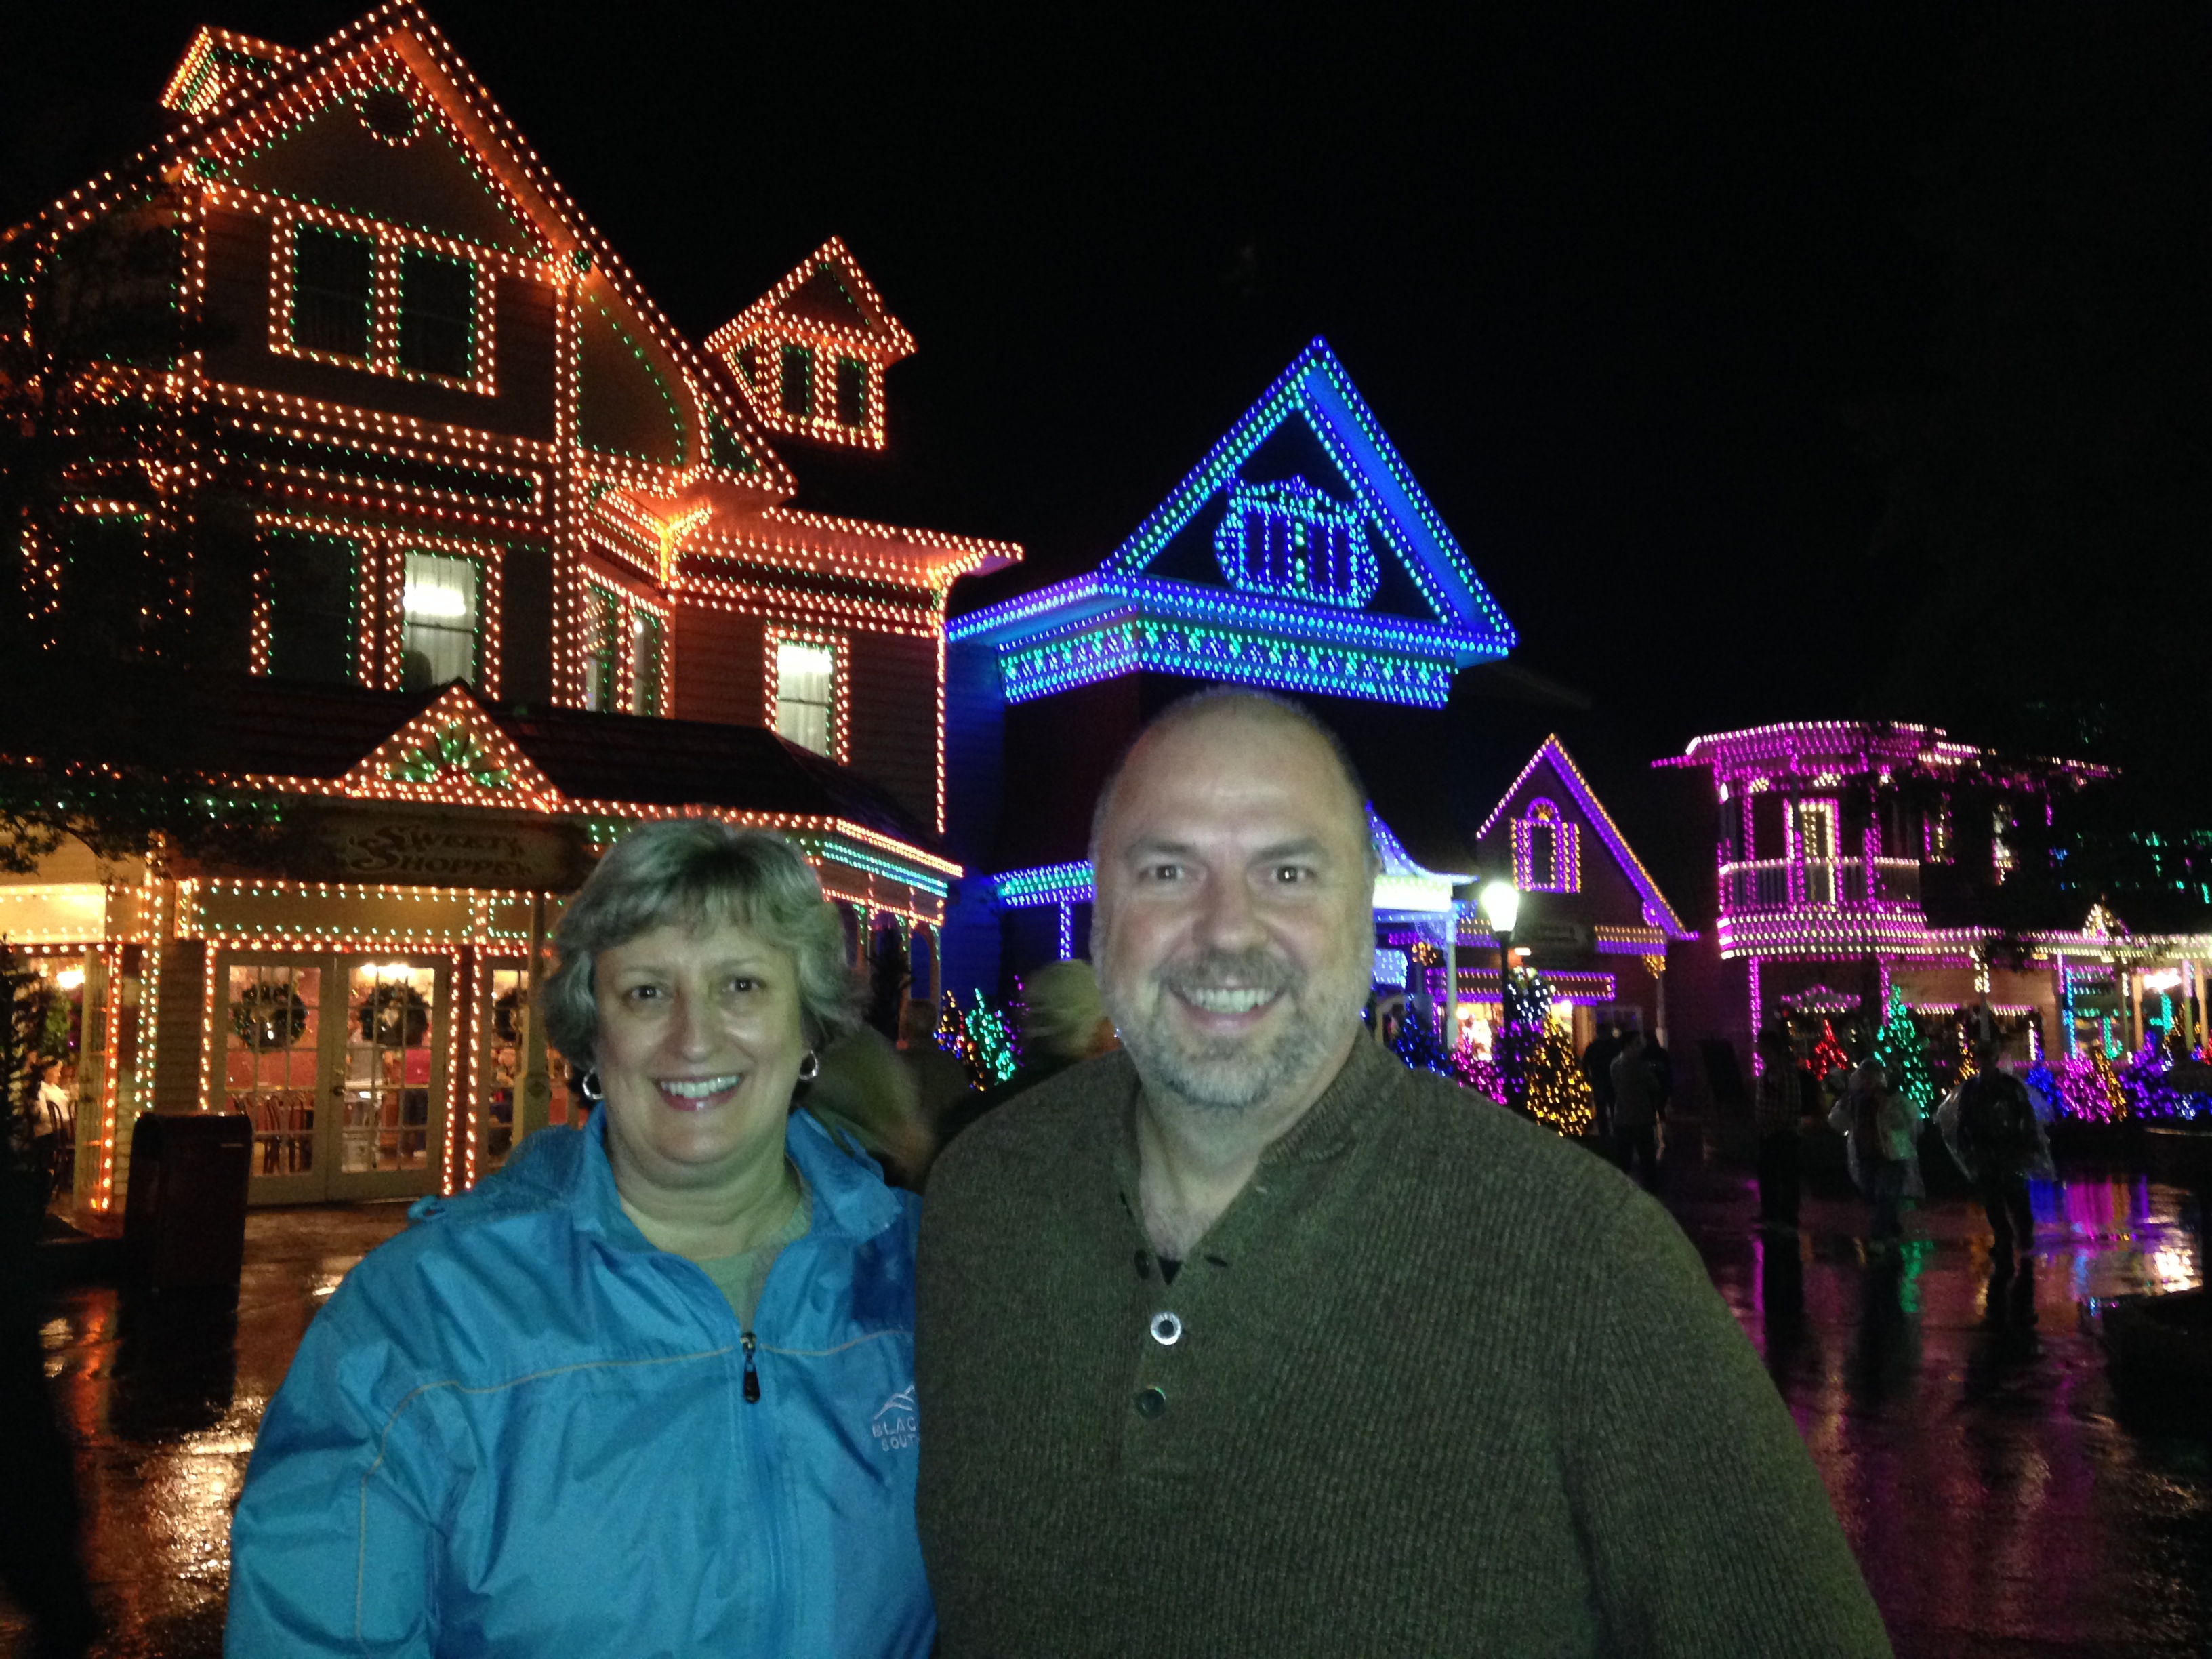 Jim and Nancy - Dollywood - Pigeon Forge, TN